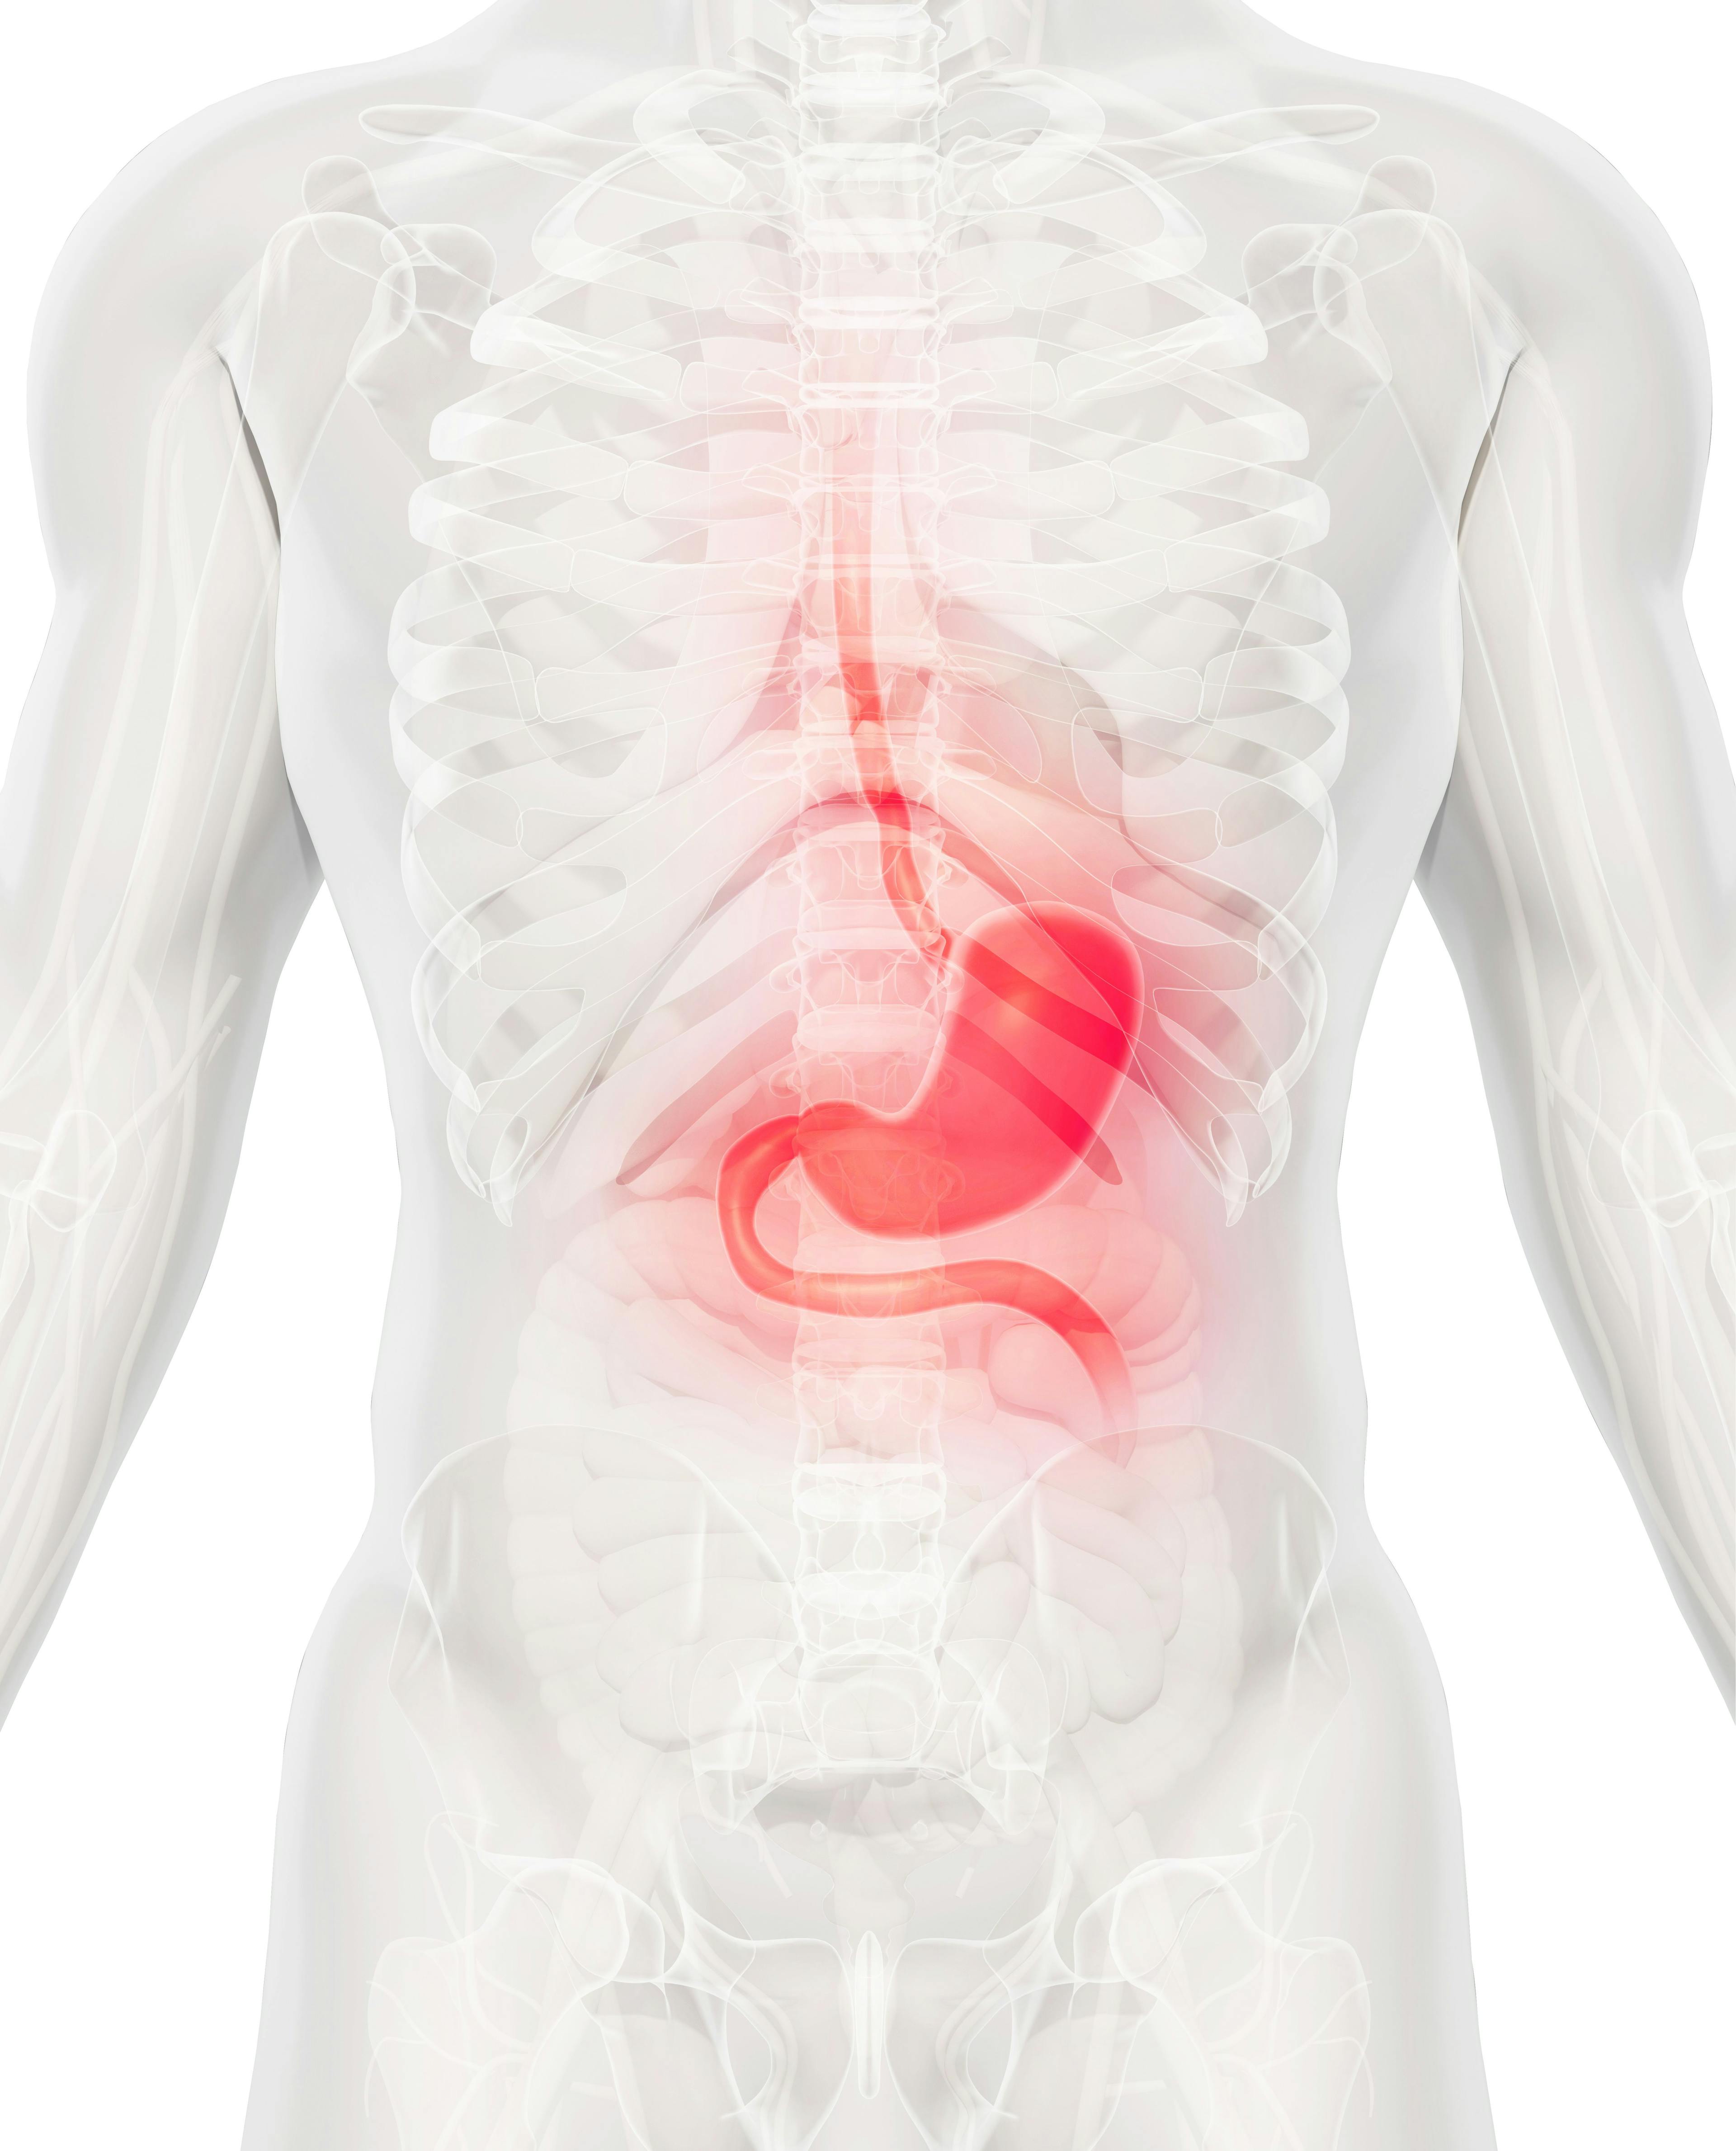 “Fruquintinib plus paclitaxel could be a promising second-line treatment option for patients with advanced gastric/GEJ adenocarcinoma who have [progressed on] fluoropyrimidine- or platinum-containing chemotherapy,” according to Rui-Hua Xu, MD, PhD.